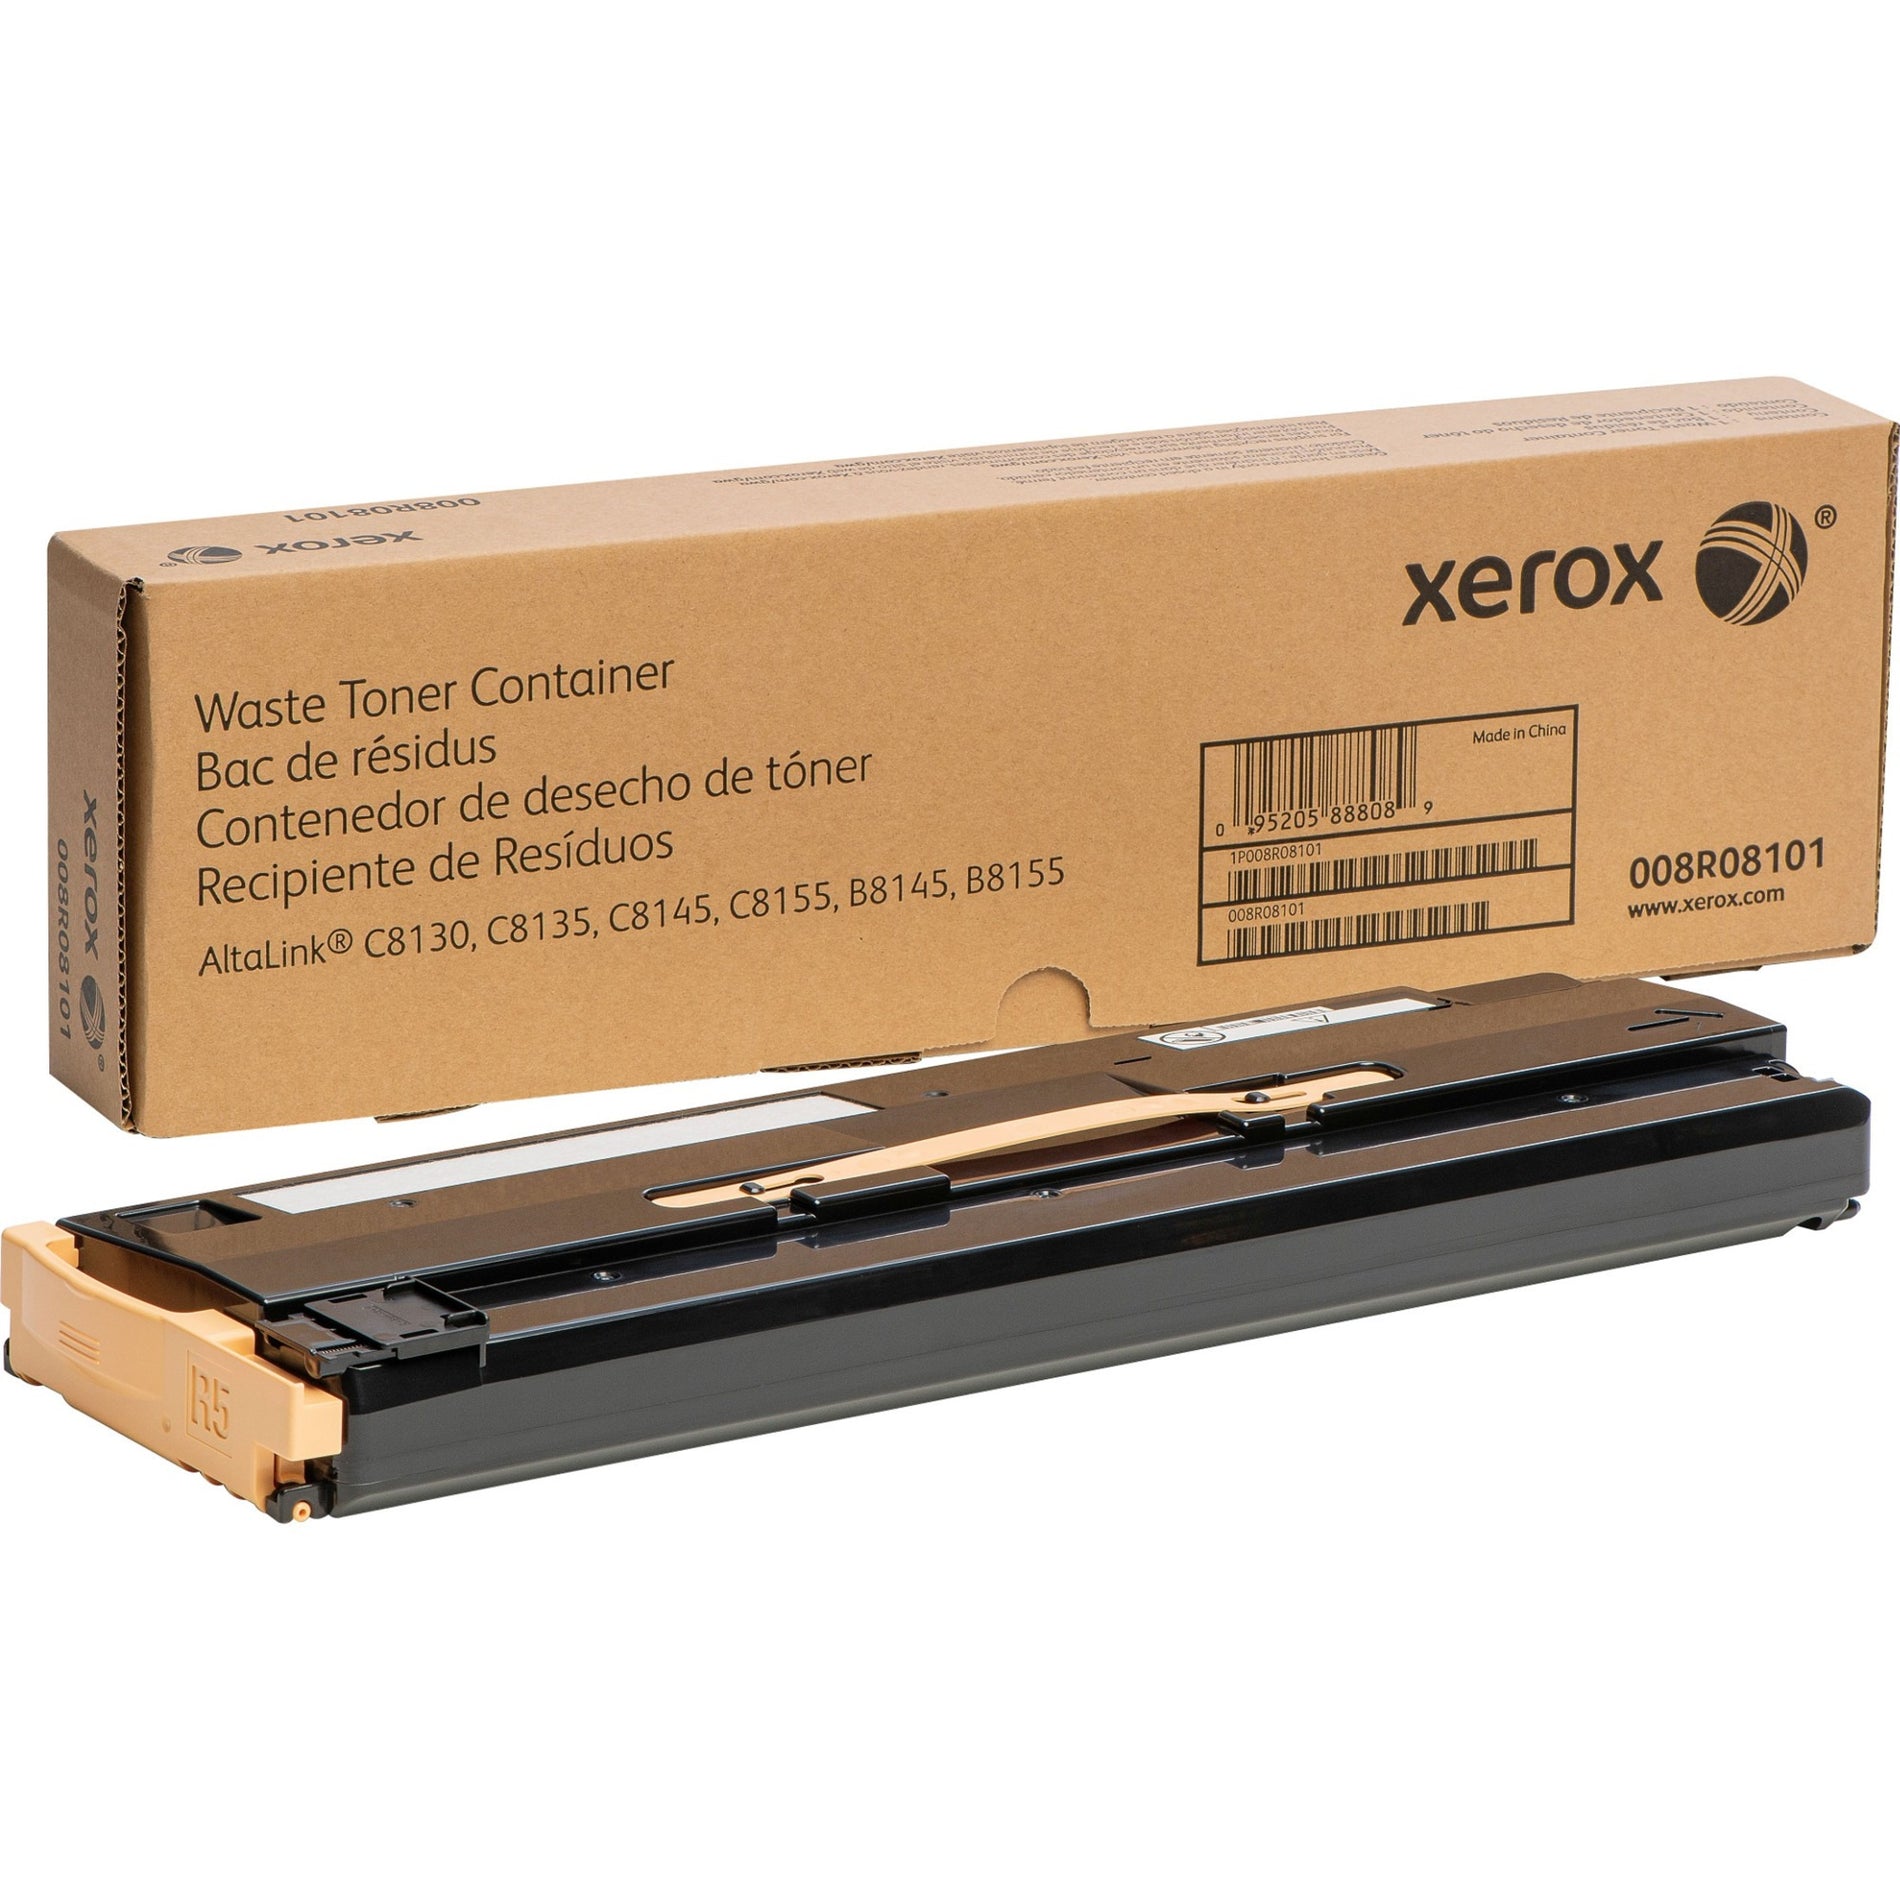 Xerox 008R08101 AL C8130/35/45/55 & B8144/B8155 Waste Toner Container, 101,000 Pages